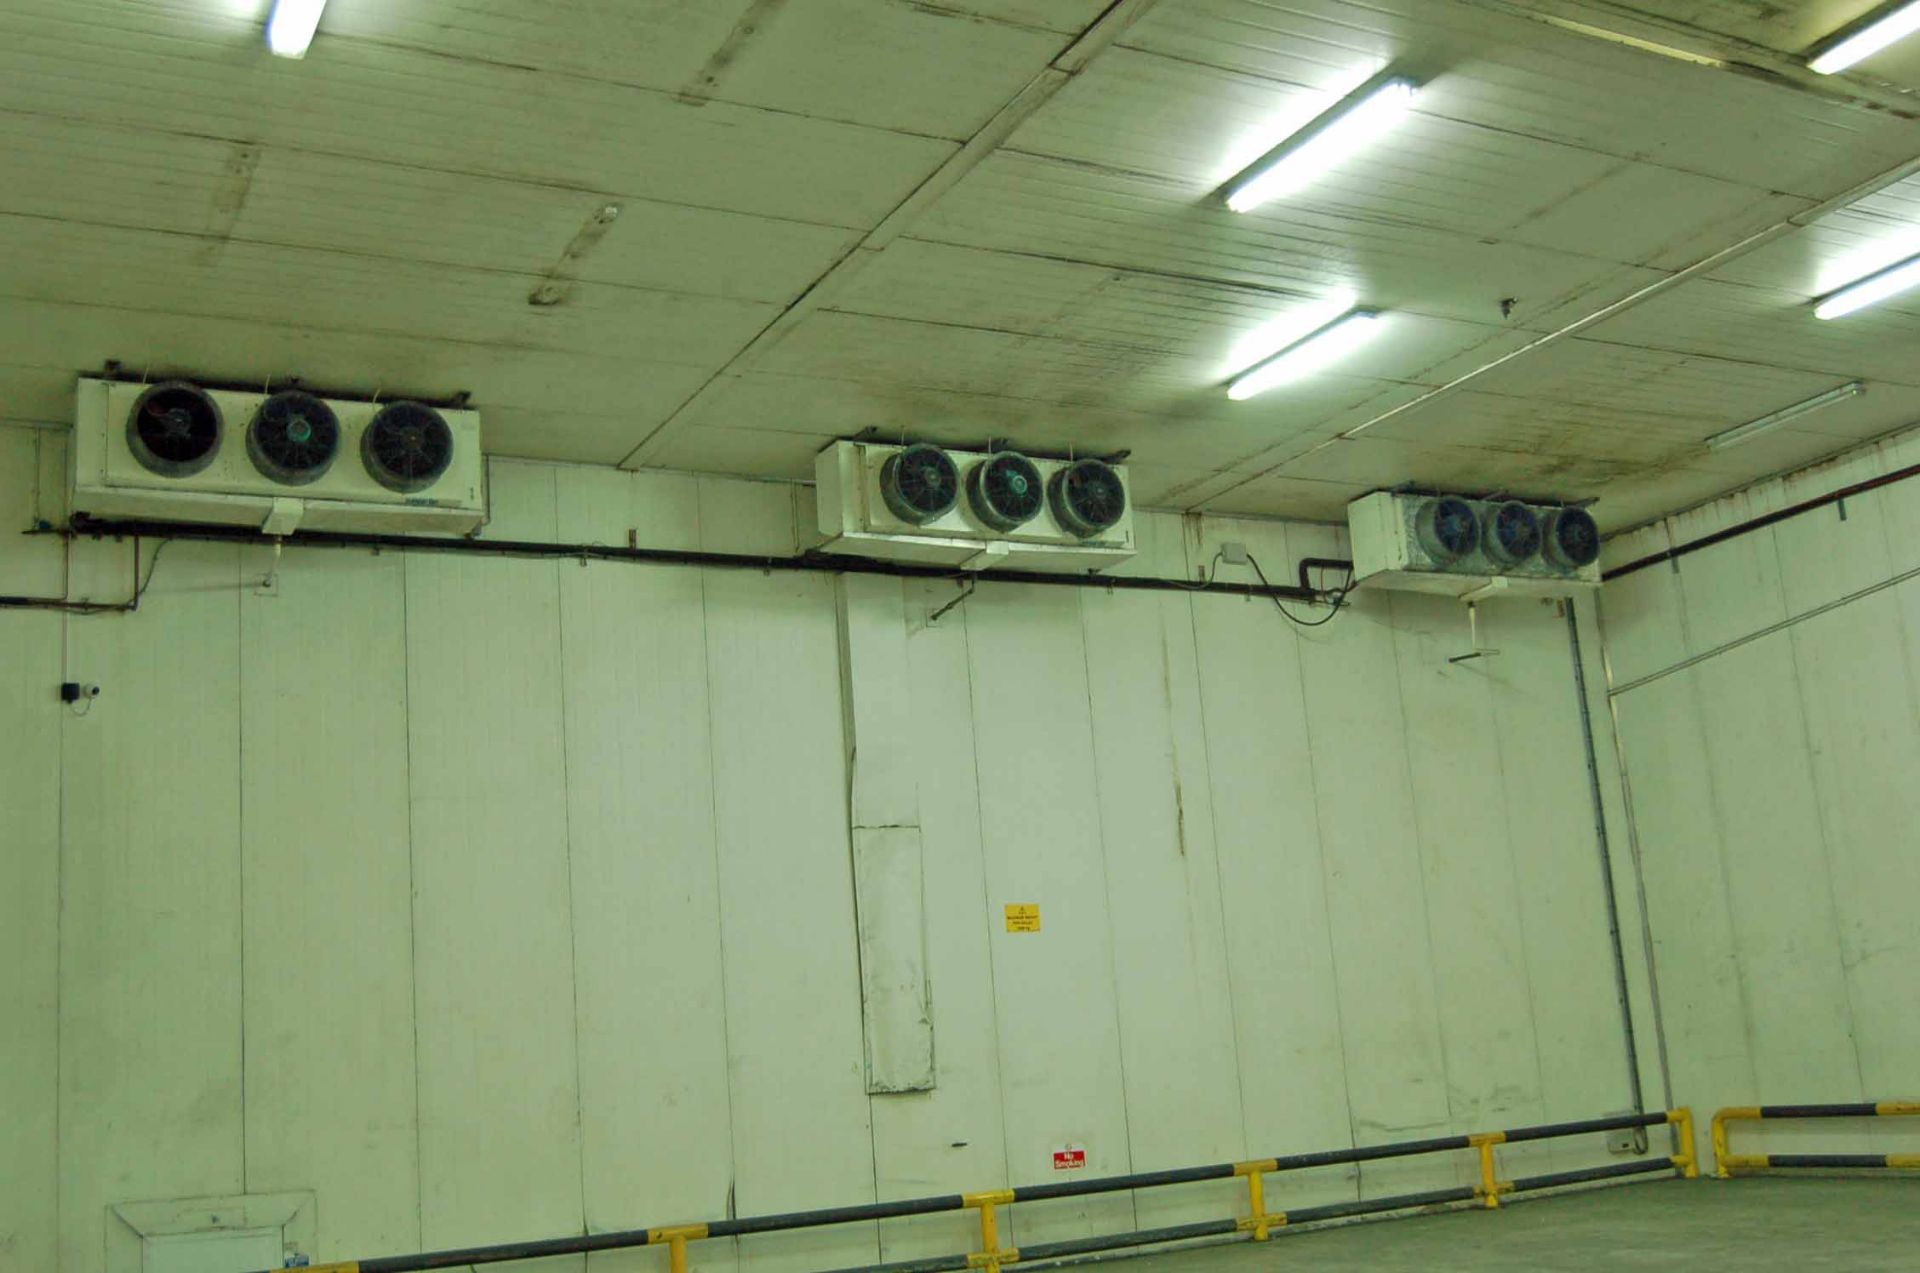 Two Stainless Steel Clad Ceiling mounted Triple Fan Chiller Fan Evaporator Units, Two Stainless - Image 5 of 7